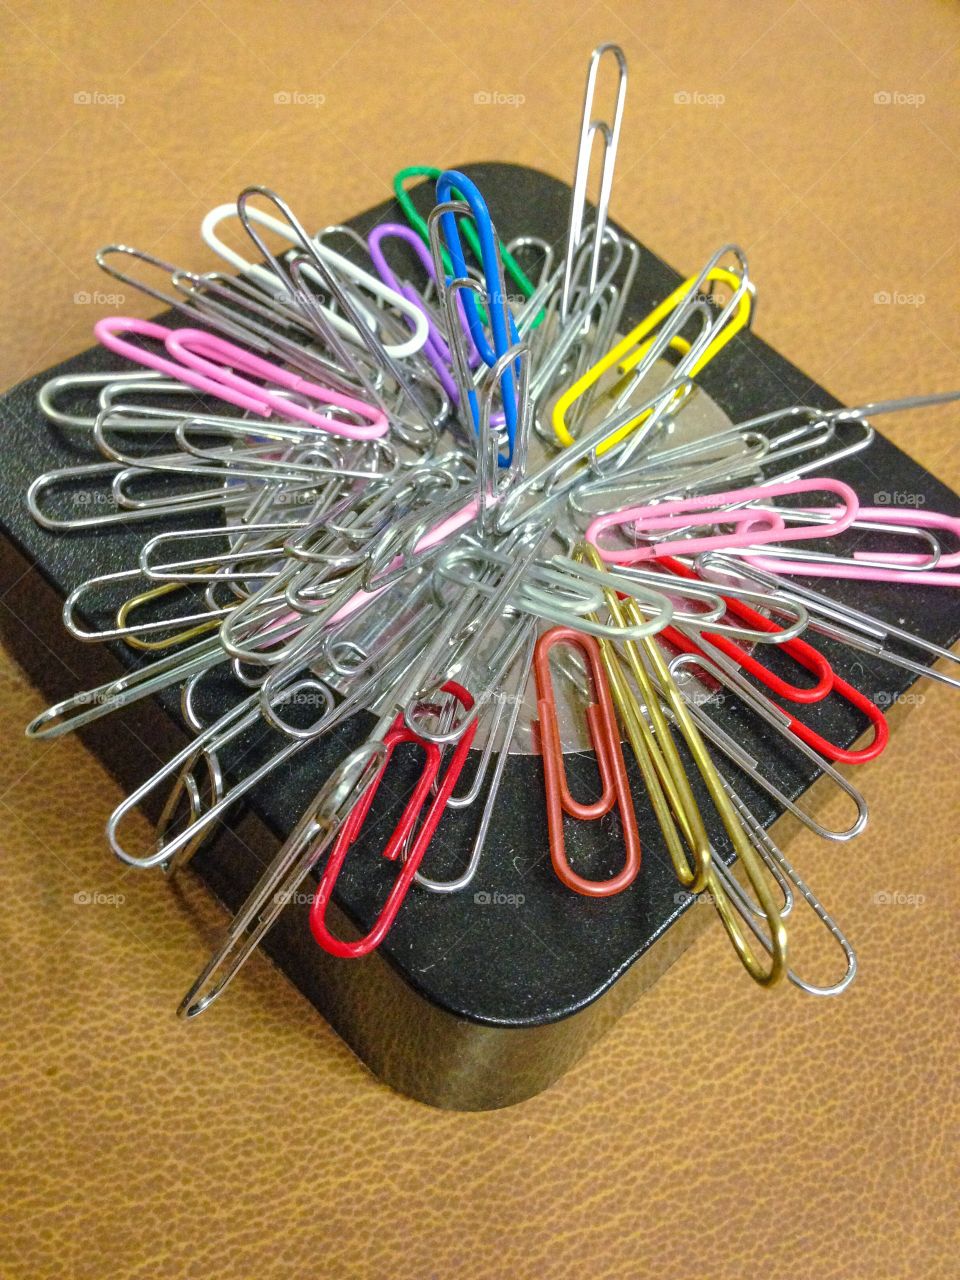 Jagged paperclips